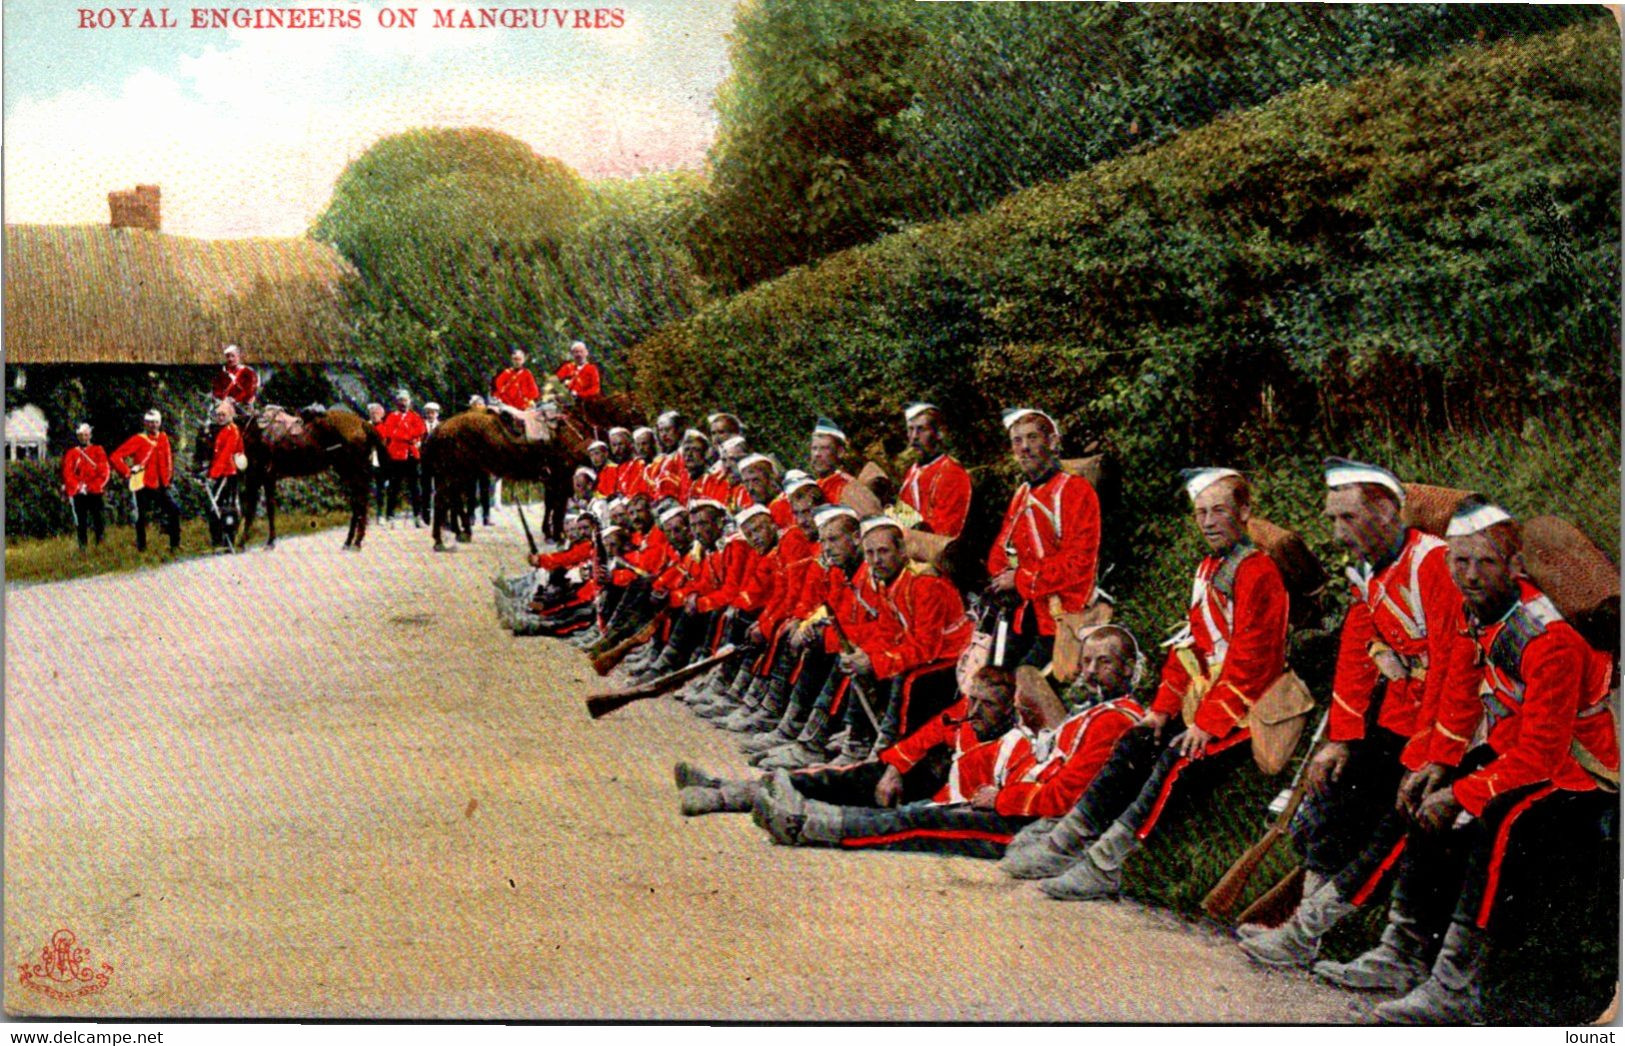 Militaire - Life In Our Army M. Ettlinger & Co. London Army Series 4621- Royal Engineers On Manoeuvres - Manovre